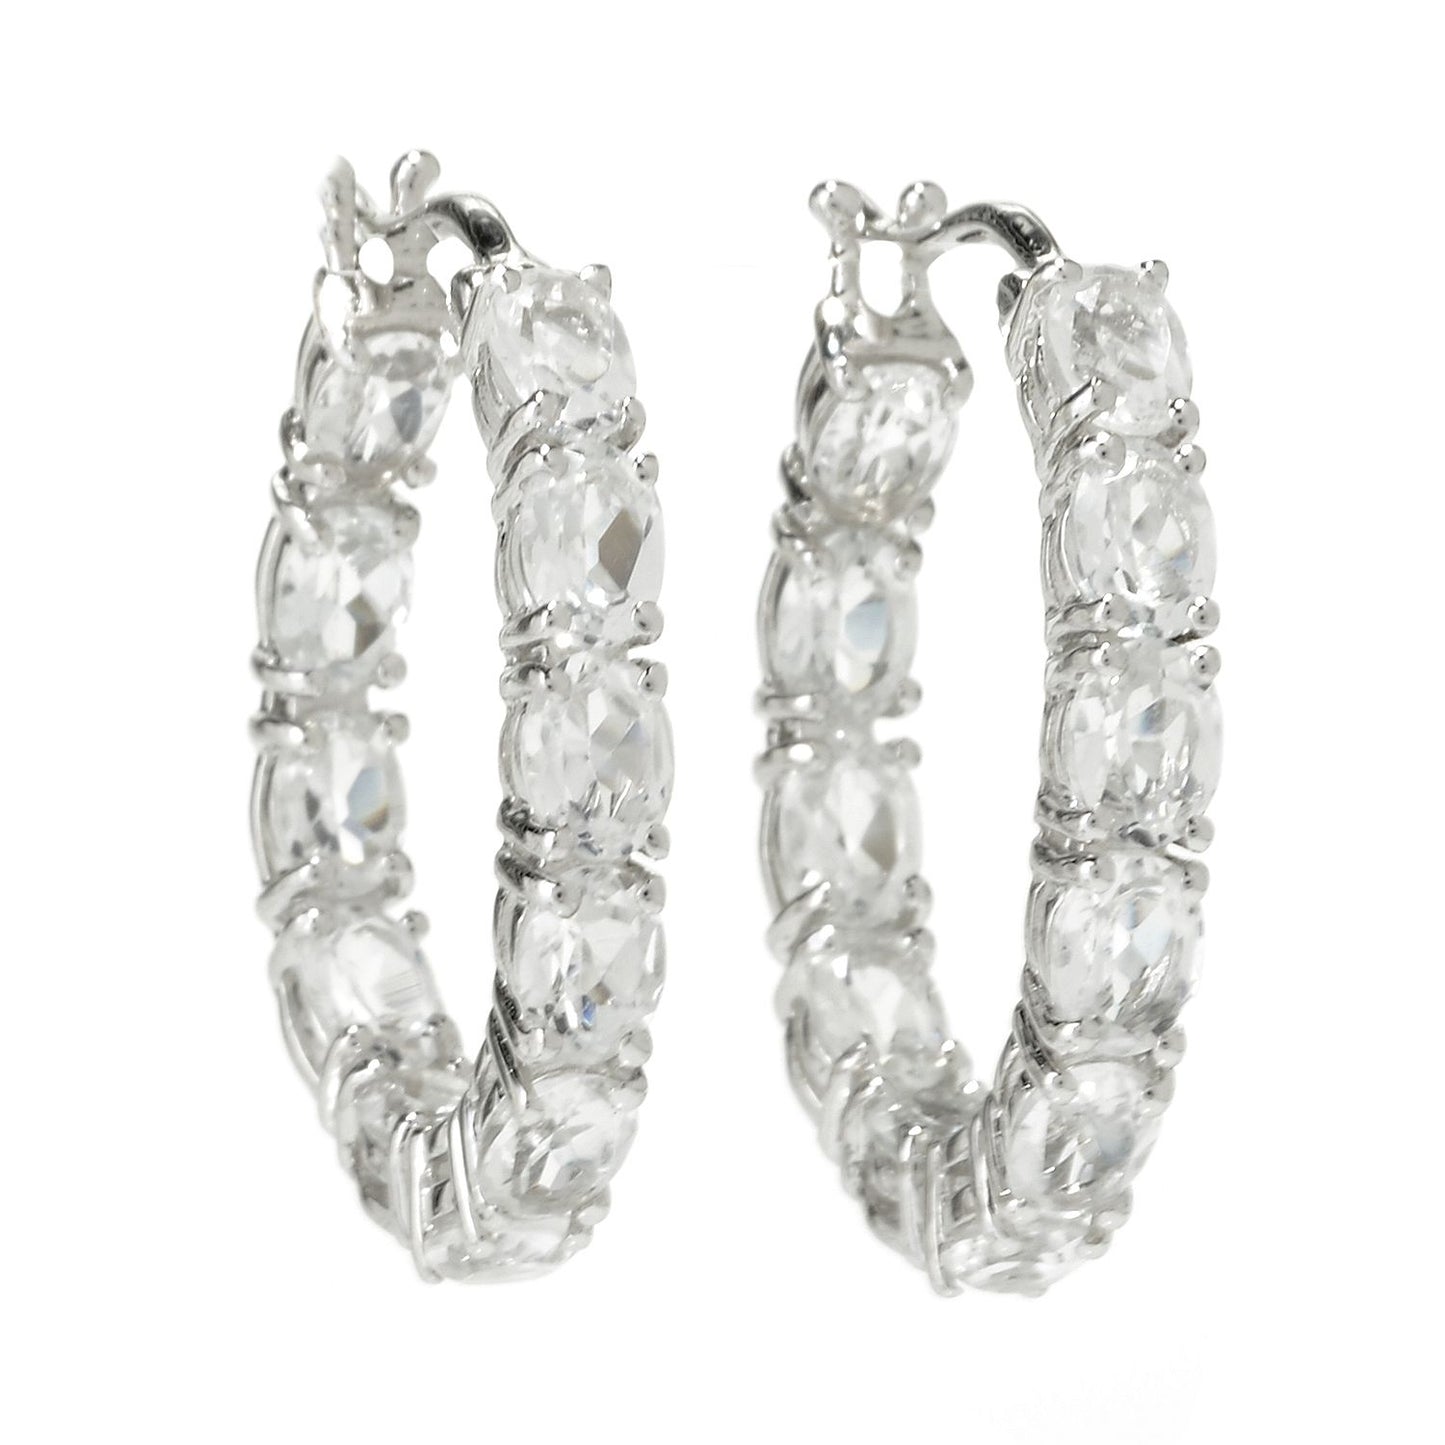 Rhodium Over Sterling Silver 2.93Ctw White Quartz Hoops Earring 0.75"L